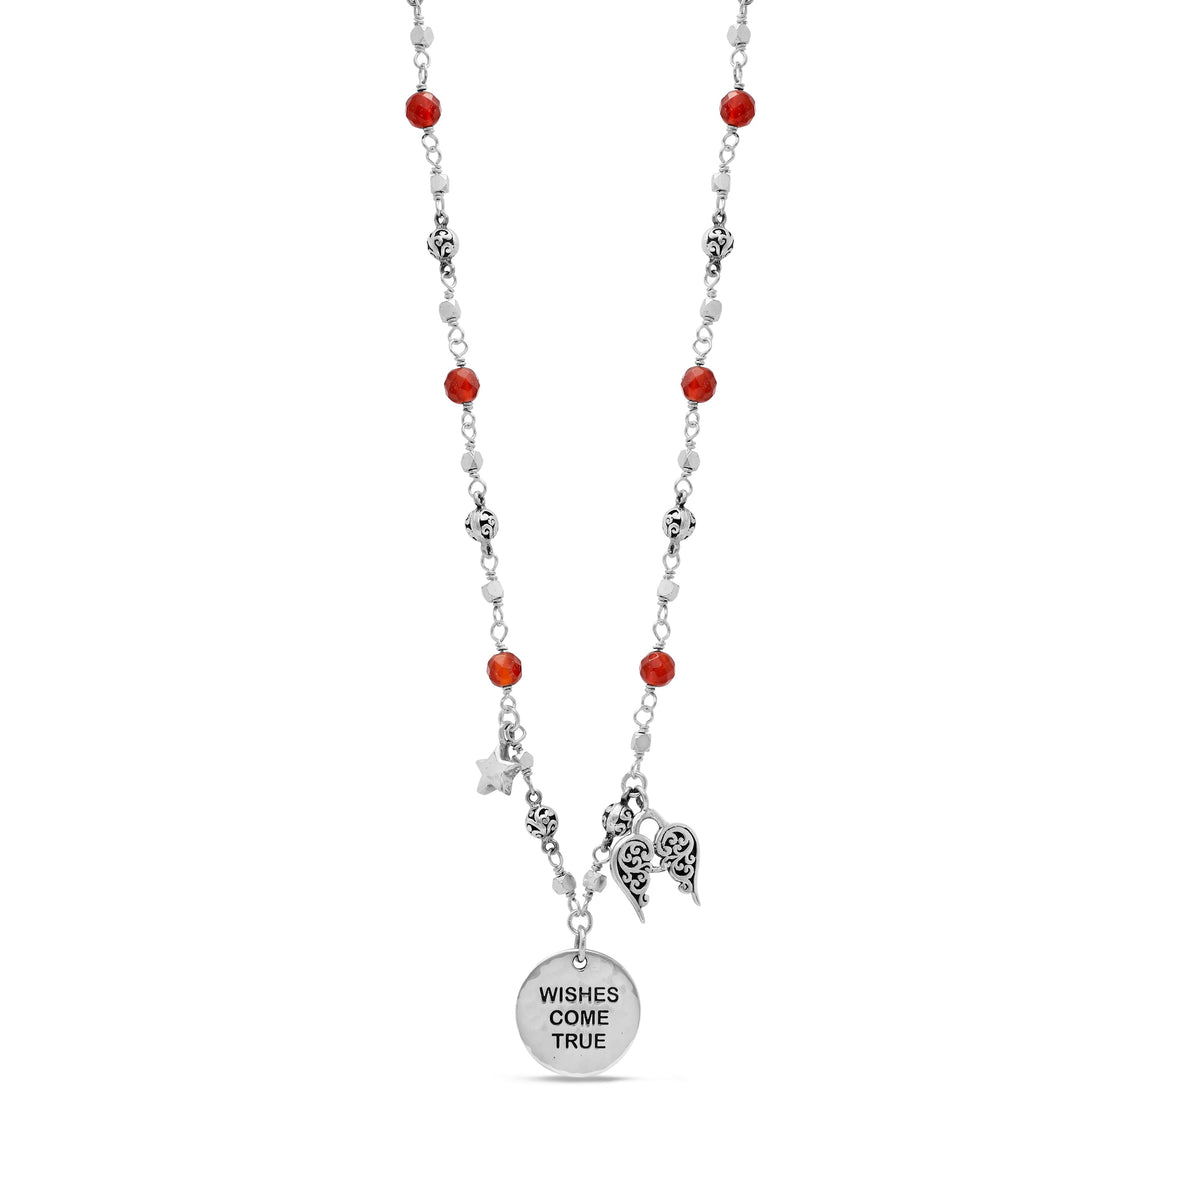 Red Carnelian and LH Scroll Beads "Wishes Come True" Wire-Wrapped Necklace (17"-20")